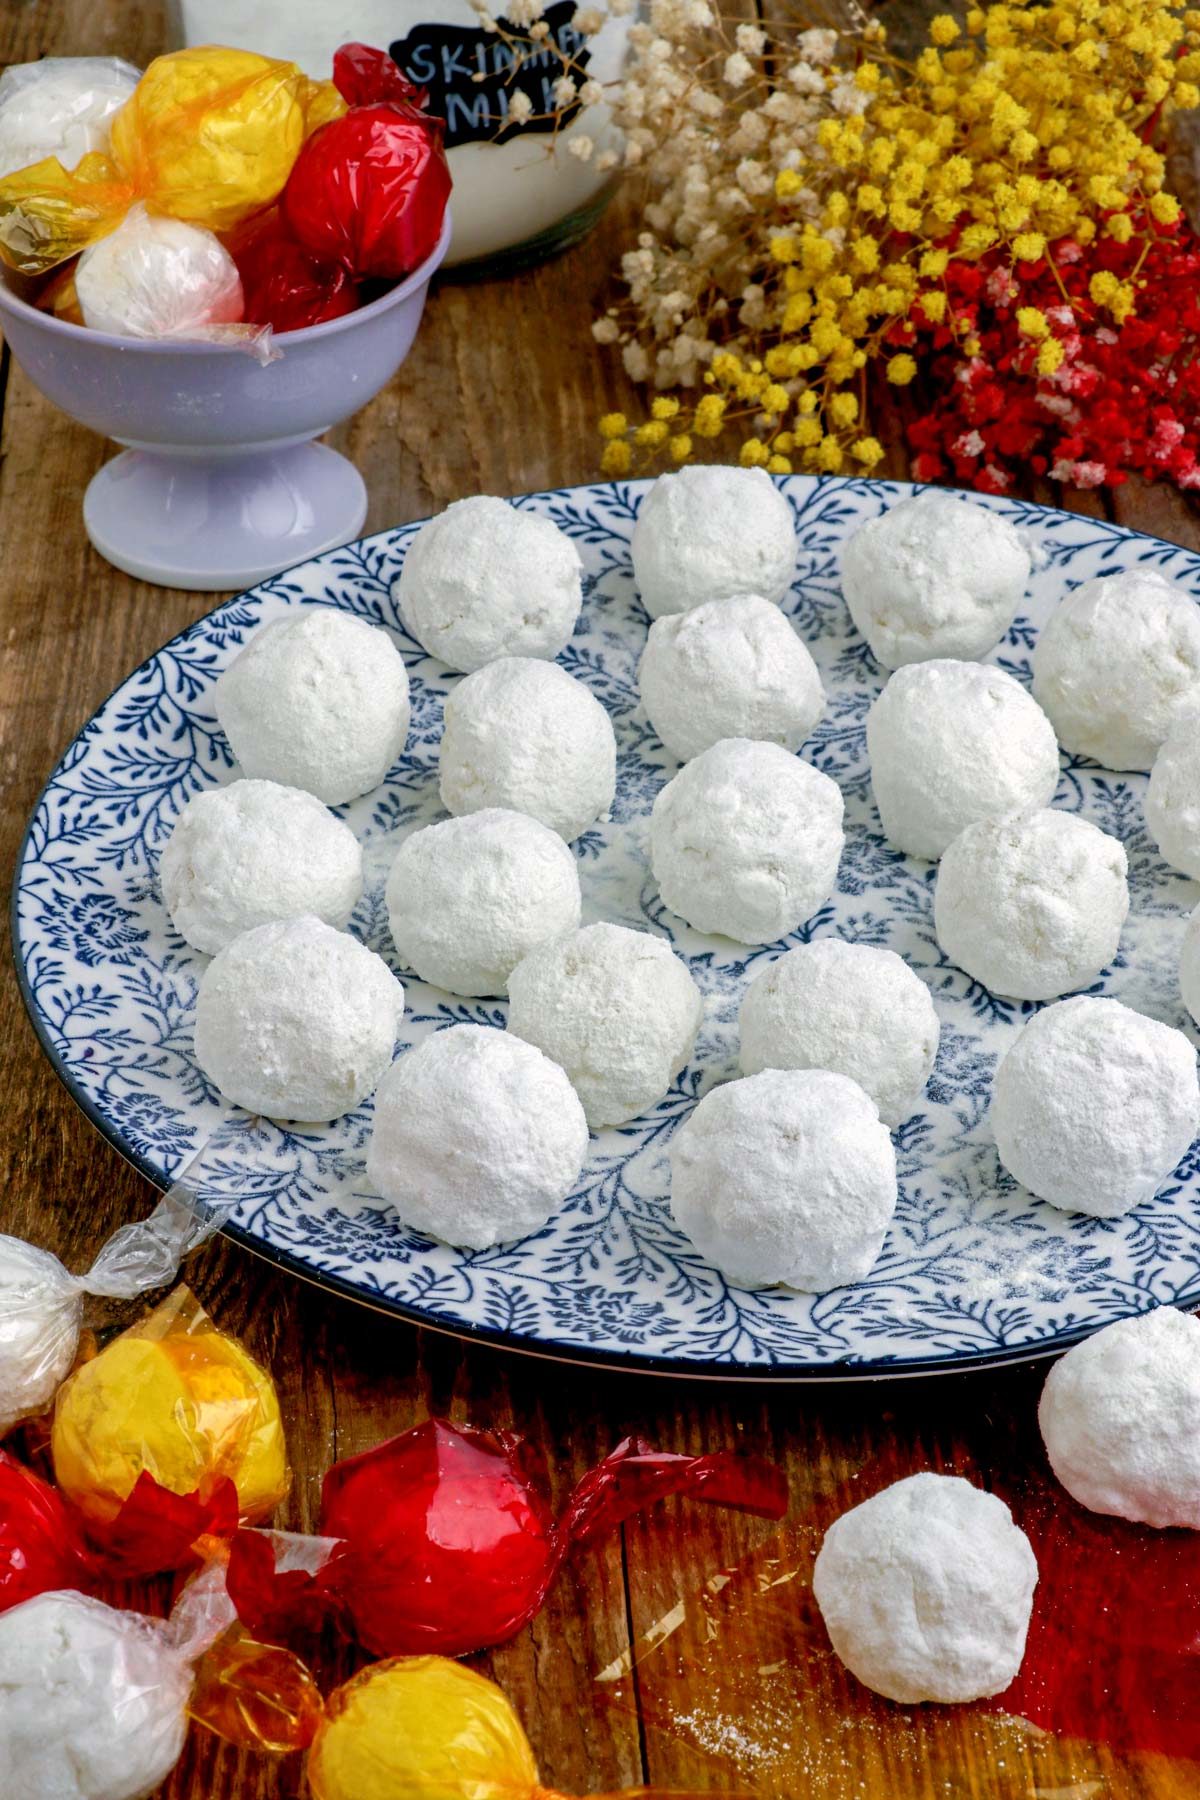 Macapuno Balls coated with skimmed milk on a serving plate.